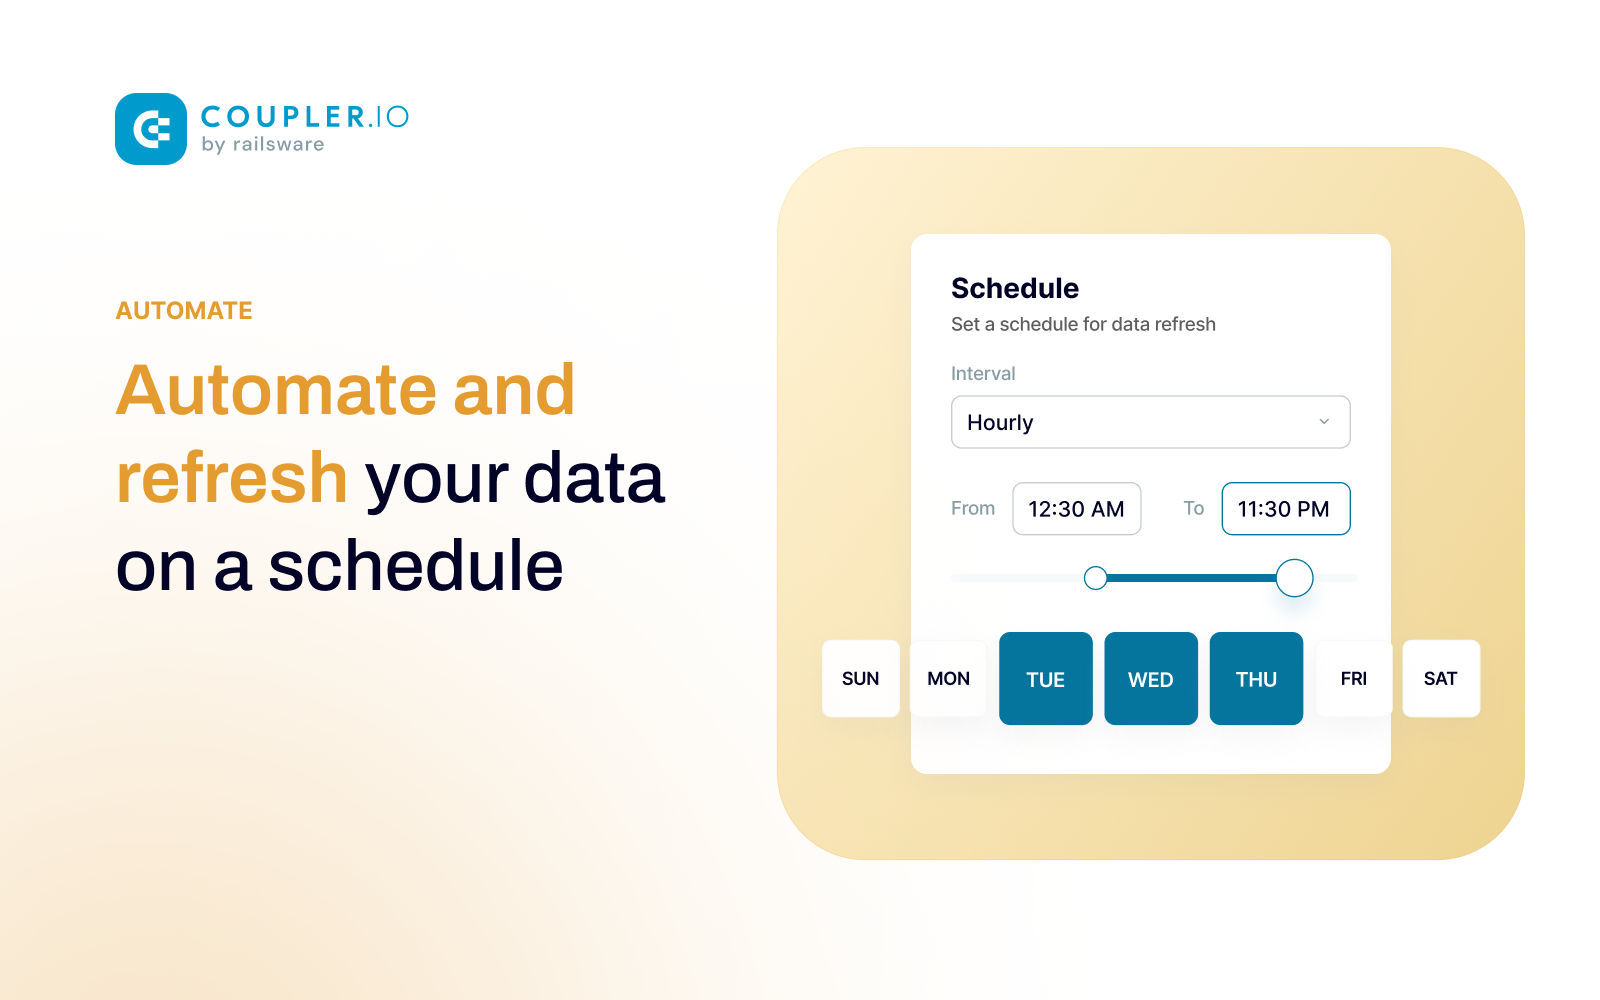 Coupler.io Software - Automate and refresh your data on a schedule